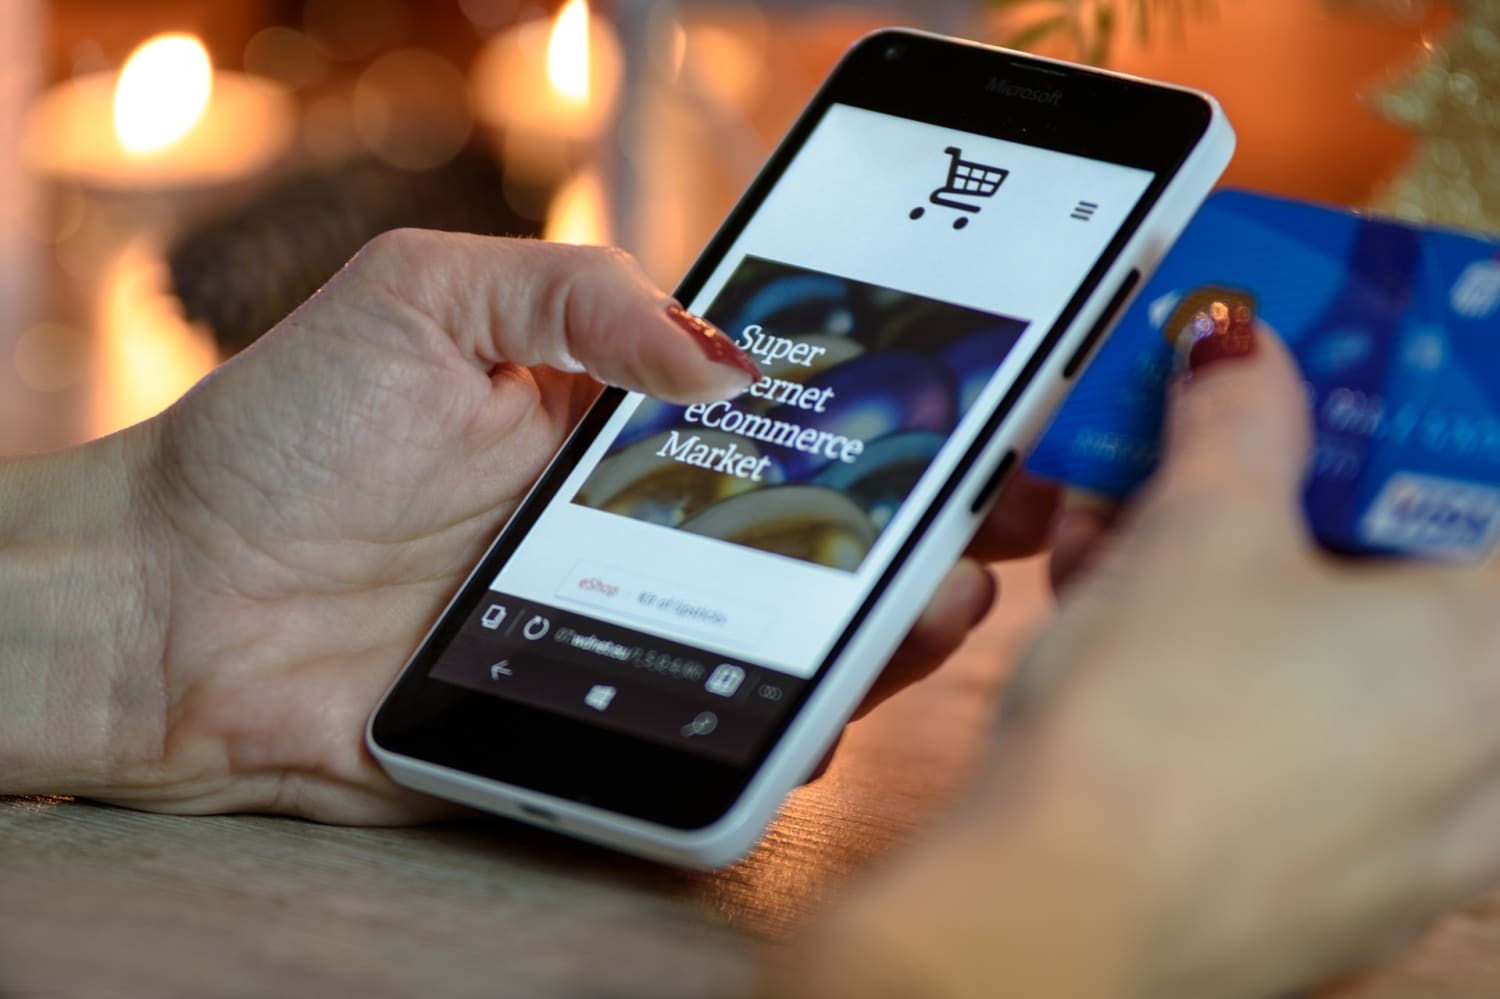 AR in Retail: 3 great examples of how it's changing e-commerce